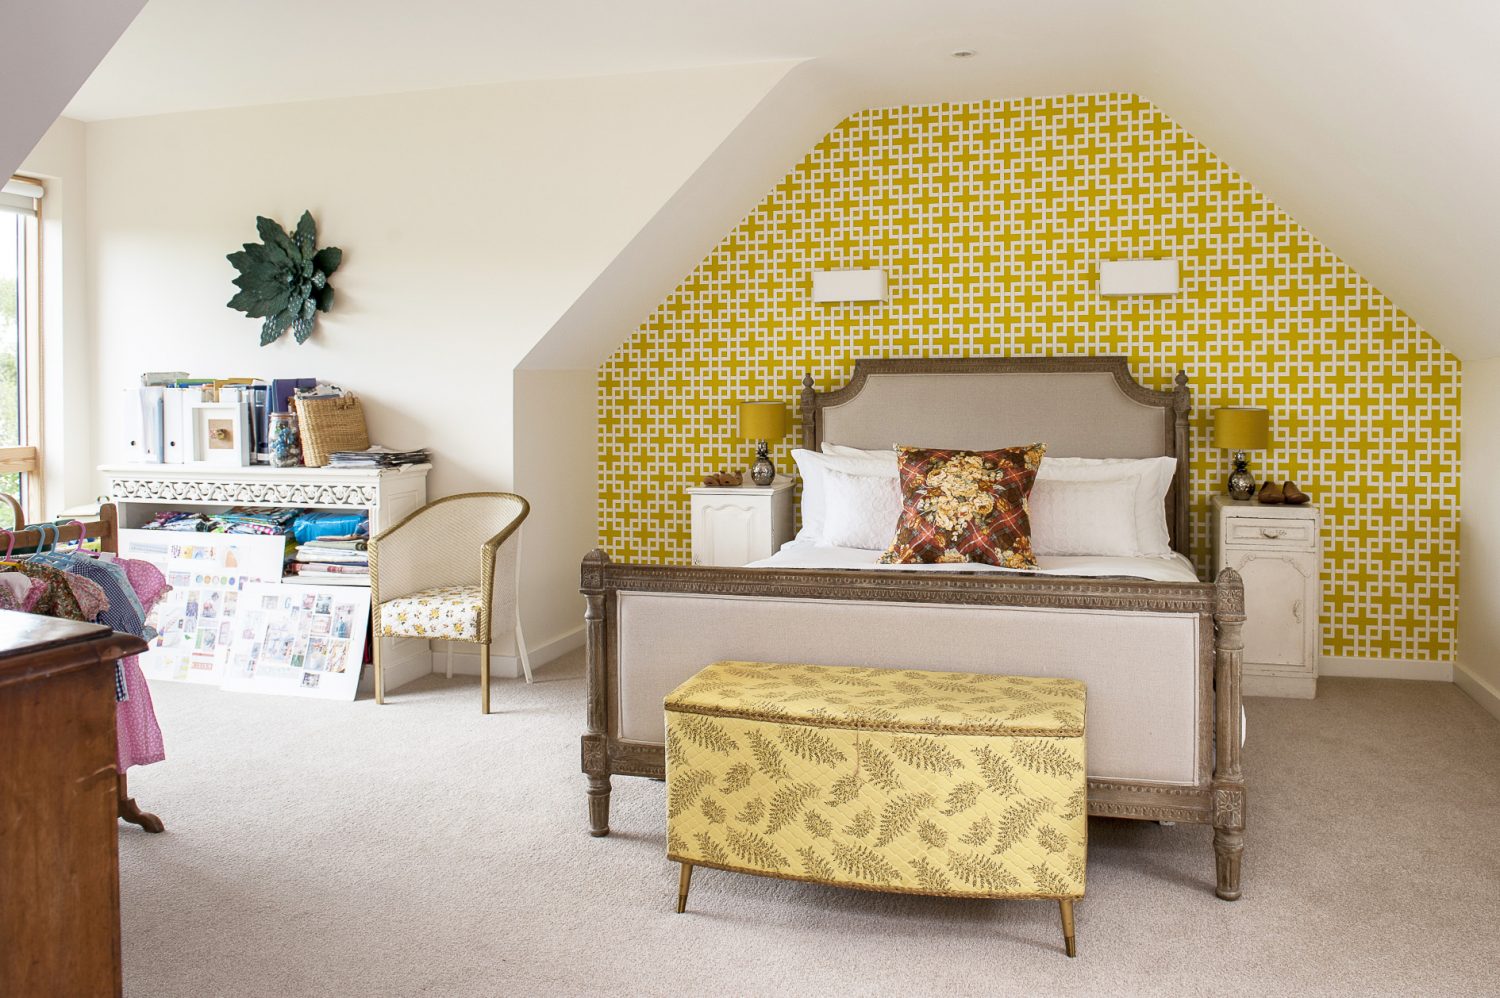 The guest room occupies a vaulted space at the top of the house in which Jenny has appropriated a place by the window to serve as her office. The wall over the Loaf bed is papered in Clarke & Clarke ‘Lattice’ next to which stands an unusual gilt Lloyd Loom chair